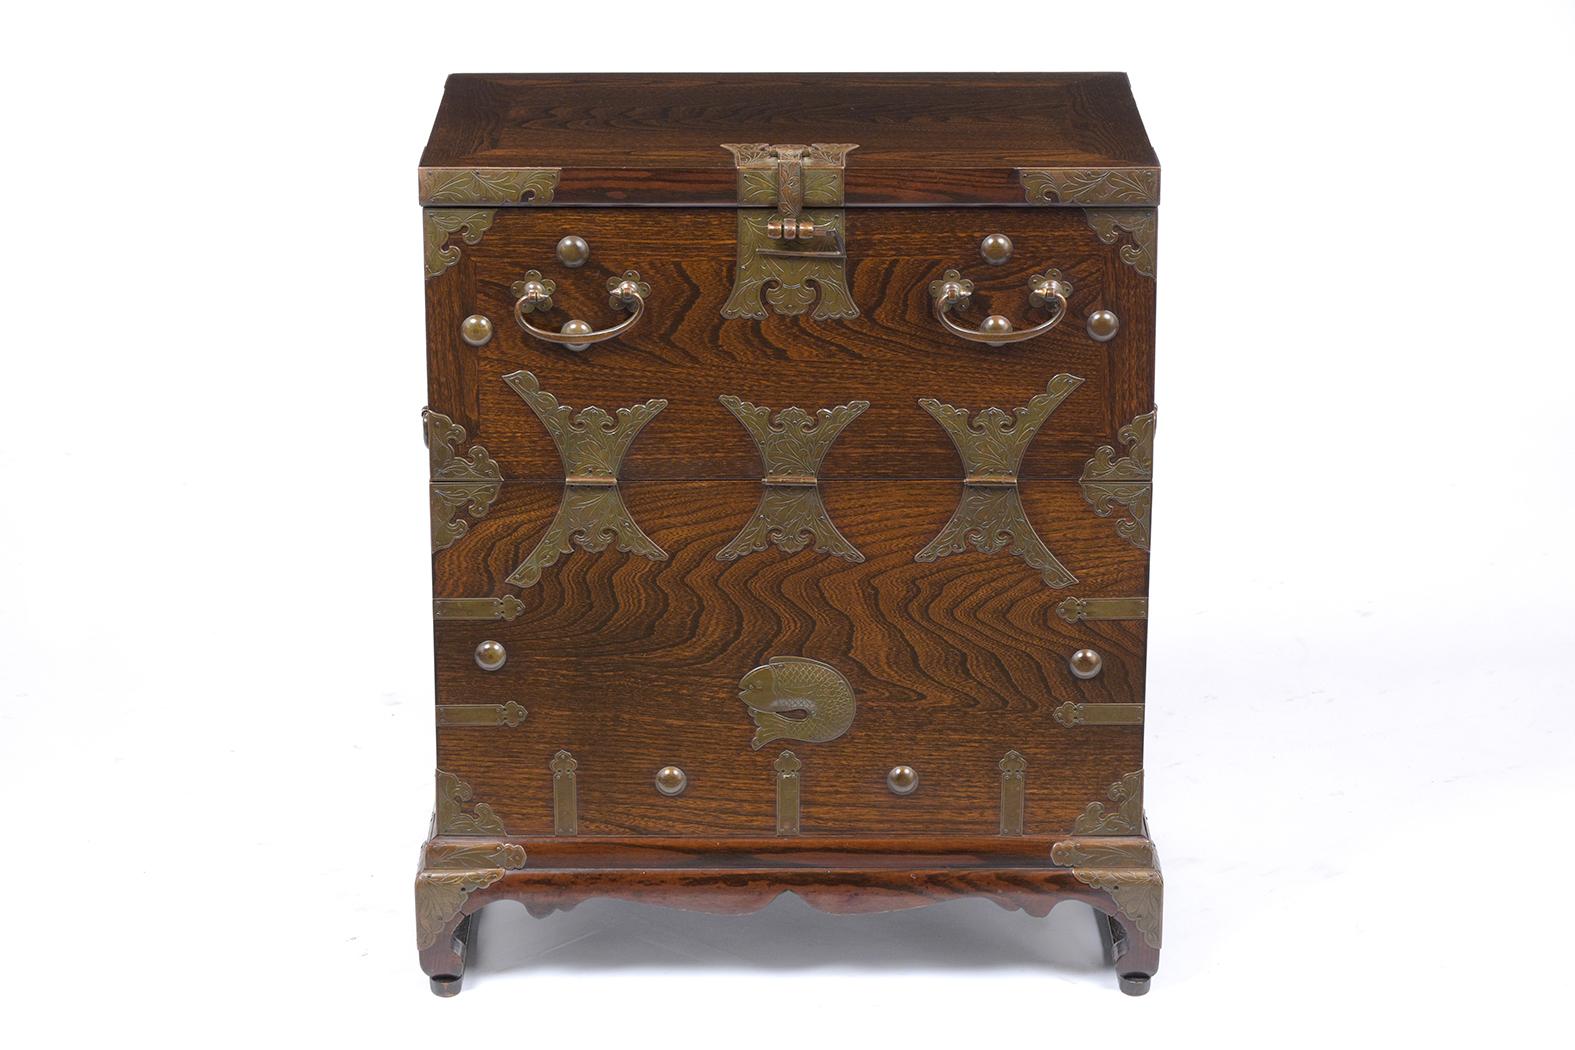 This vintage Korean chest with decorative brass accents is made out of solid wood and has been newly restored, this piece is finished in walnut color only been waxed/polished bringing amazing patina finish. This piece has a finely brass engraving